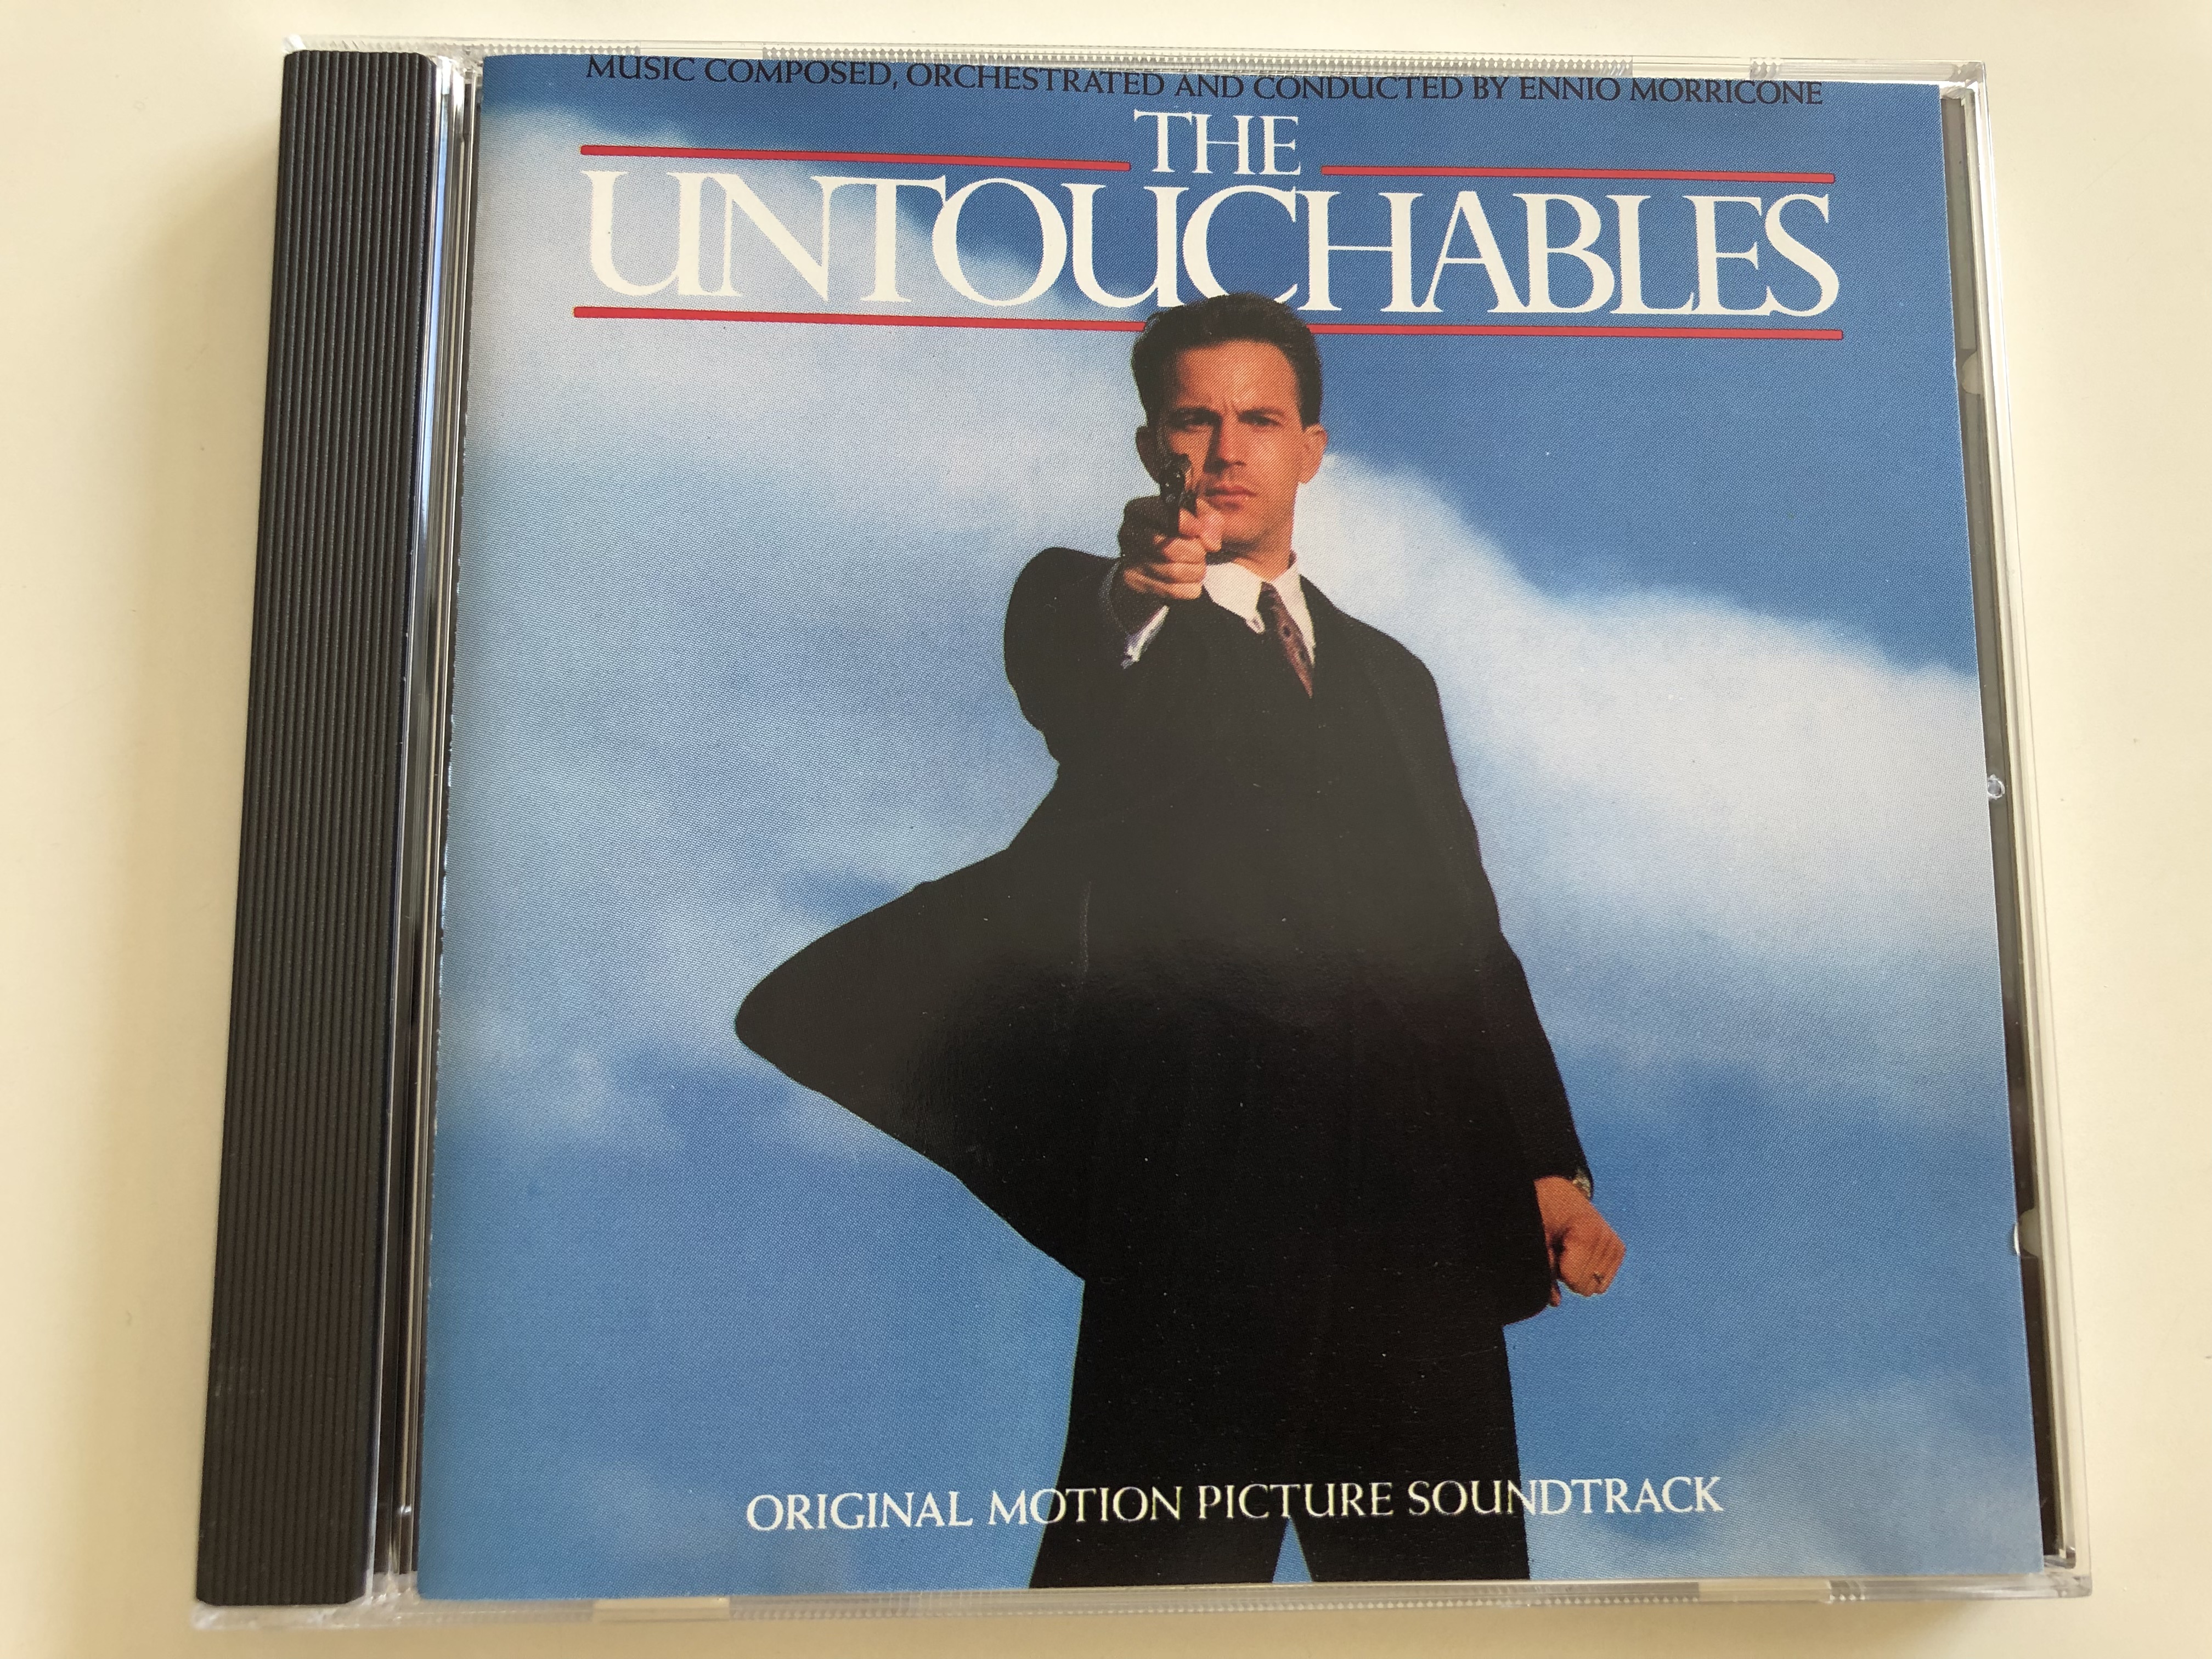 the-untouchables-original-motion-picture-soundtrack-music-composed-orchestrated-conducted-by-ennio-morricone-audio-cd-1987-a-m-records-393-909-2-1-.jpg